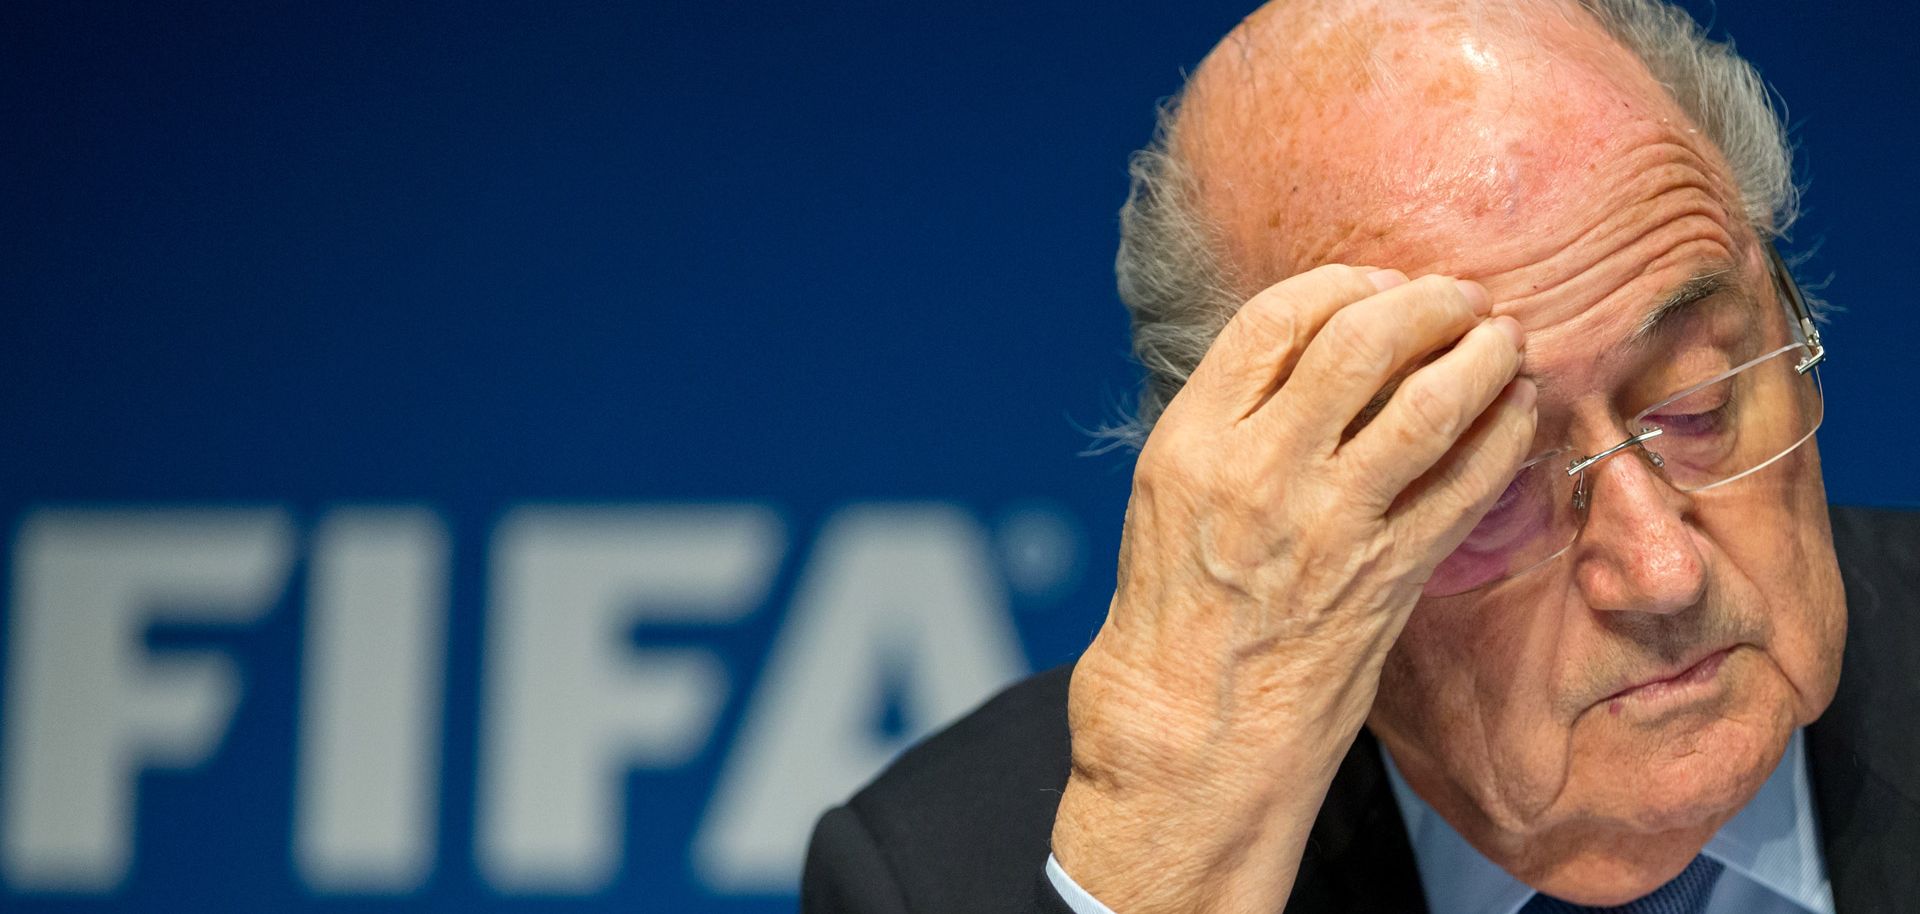 Former FIFA President Joseph S. Blatter at a 2015 press conference in Zurich.